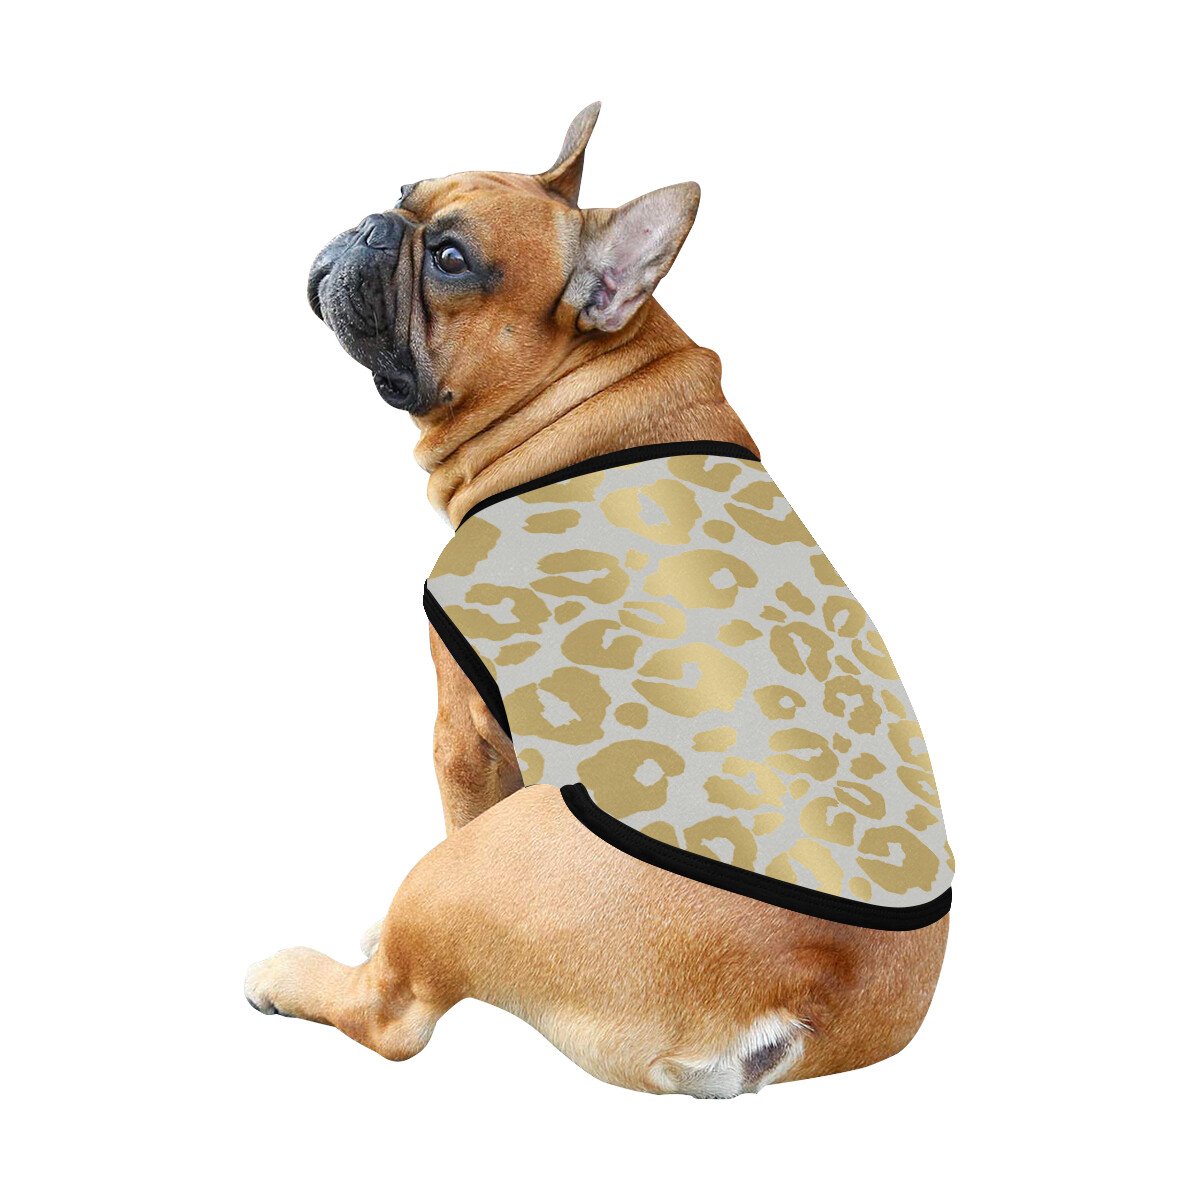 🐕 Leopard print Dog shirt, Dog Tank Top, Dog t-shirt, Dog clothes, Gifts, front back print, 7 sizes XS to 3XL, dog gifts, gold and milk green white